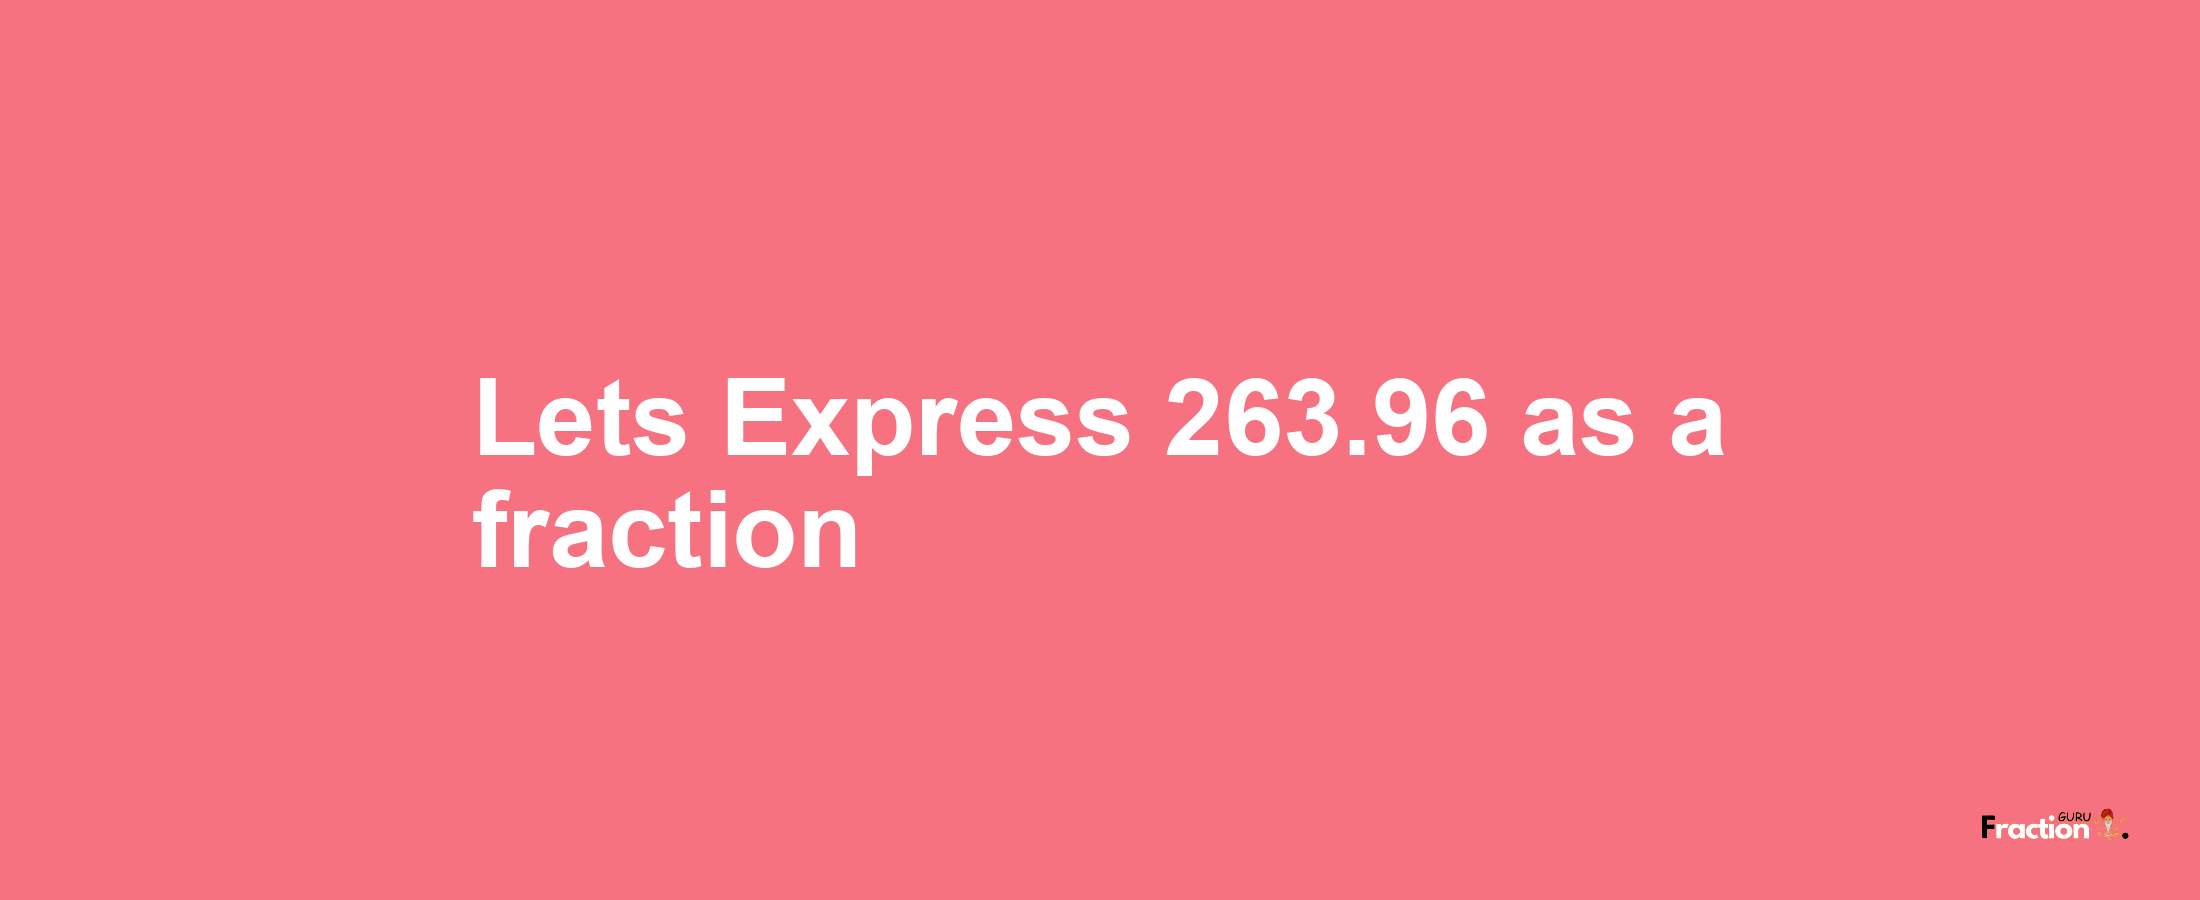 Lets Express 263.96 as afraction